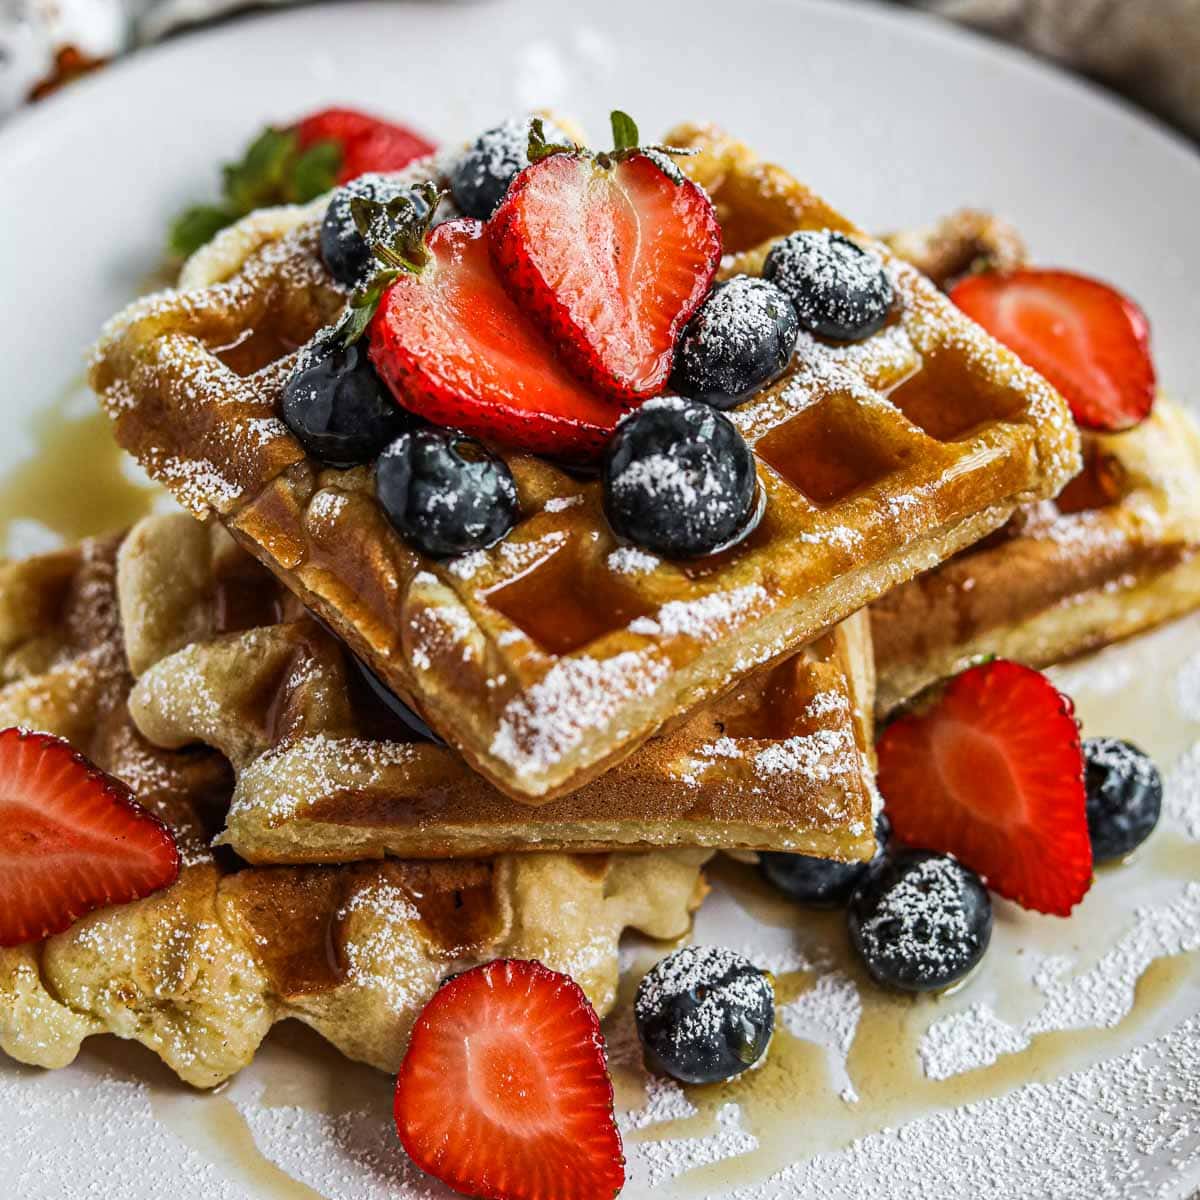 Gluten-free mochi waffles stacked on a plate with berries, maple syrup, and powdered sugar.